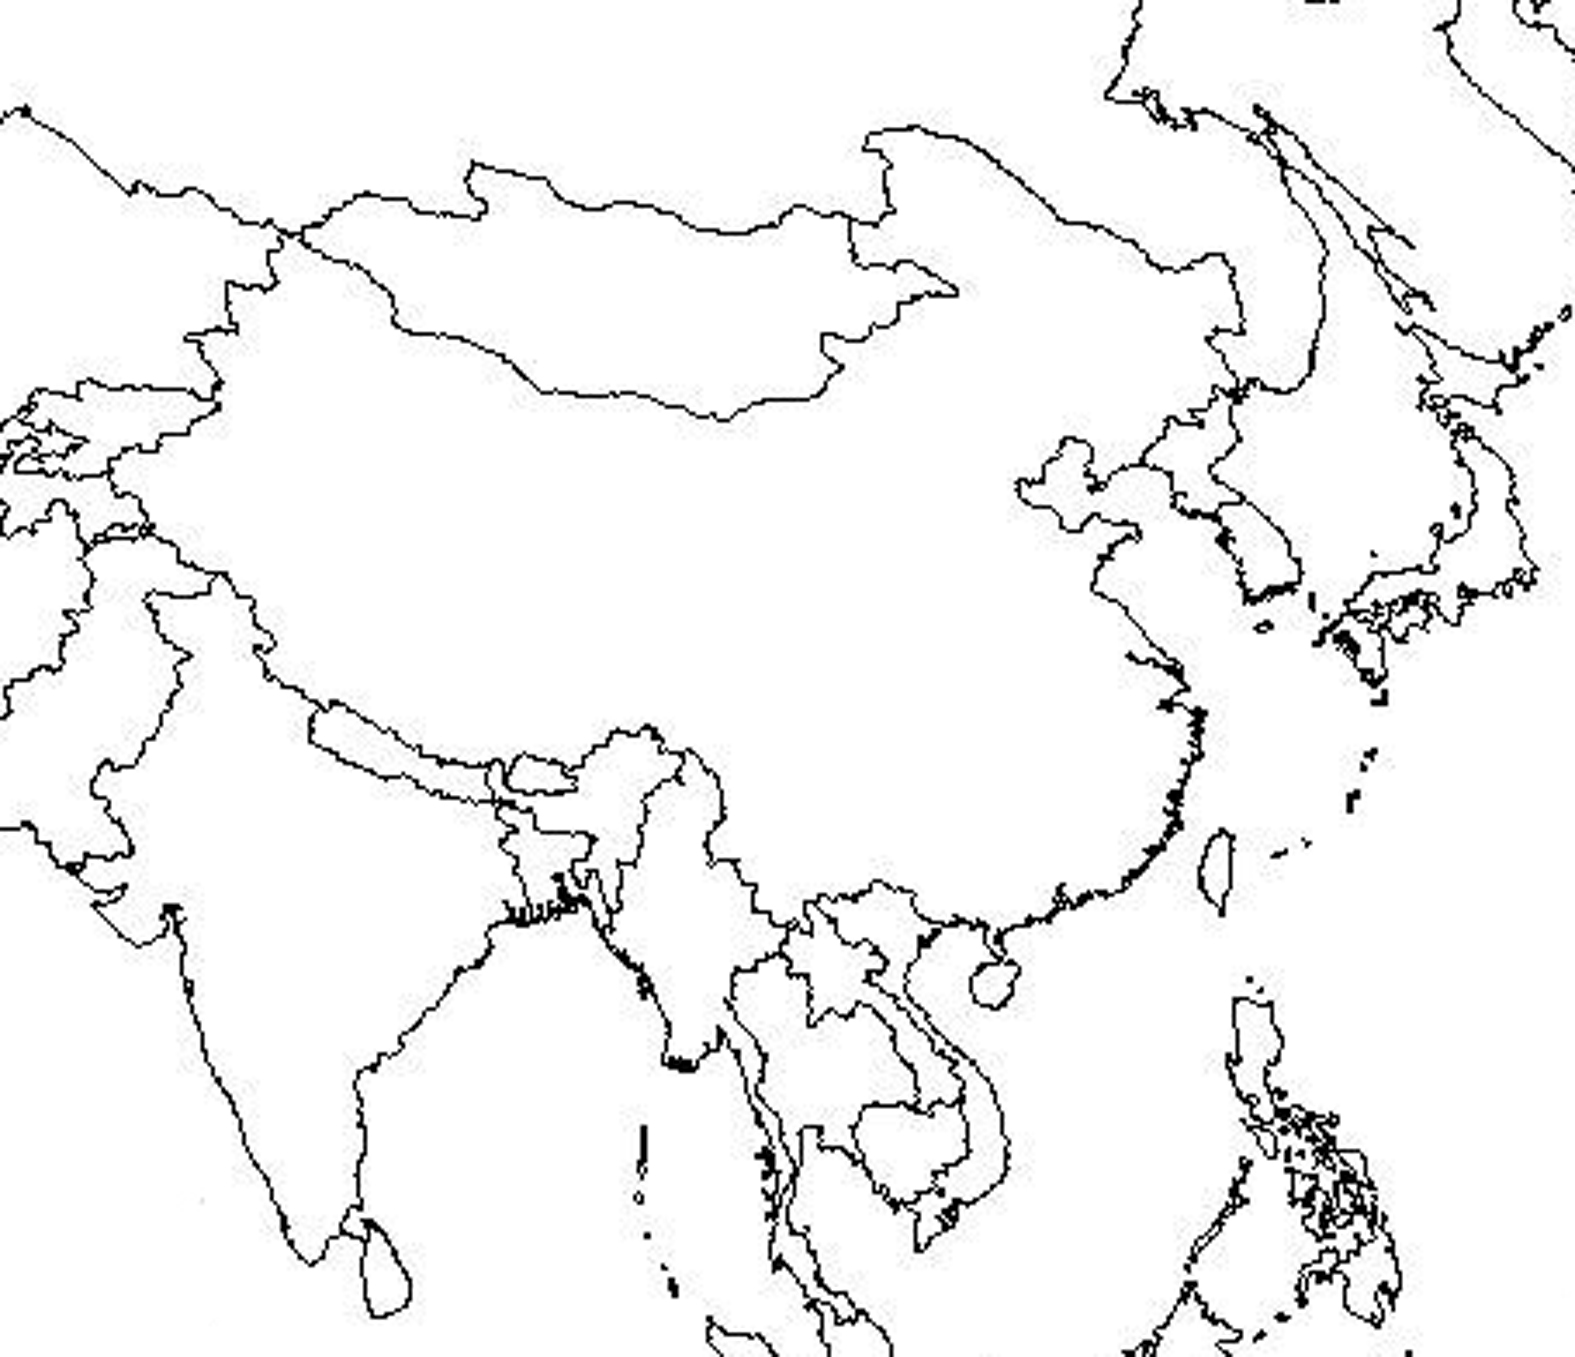 World+map+with+countries+outline